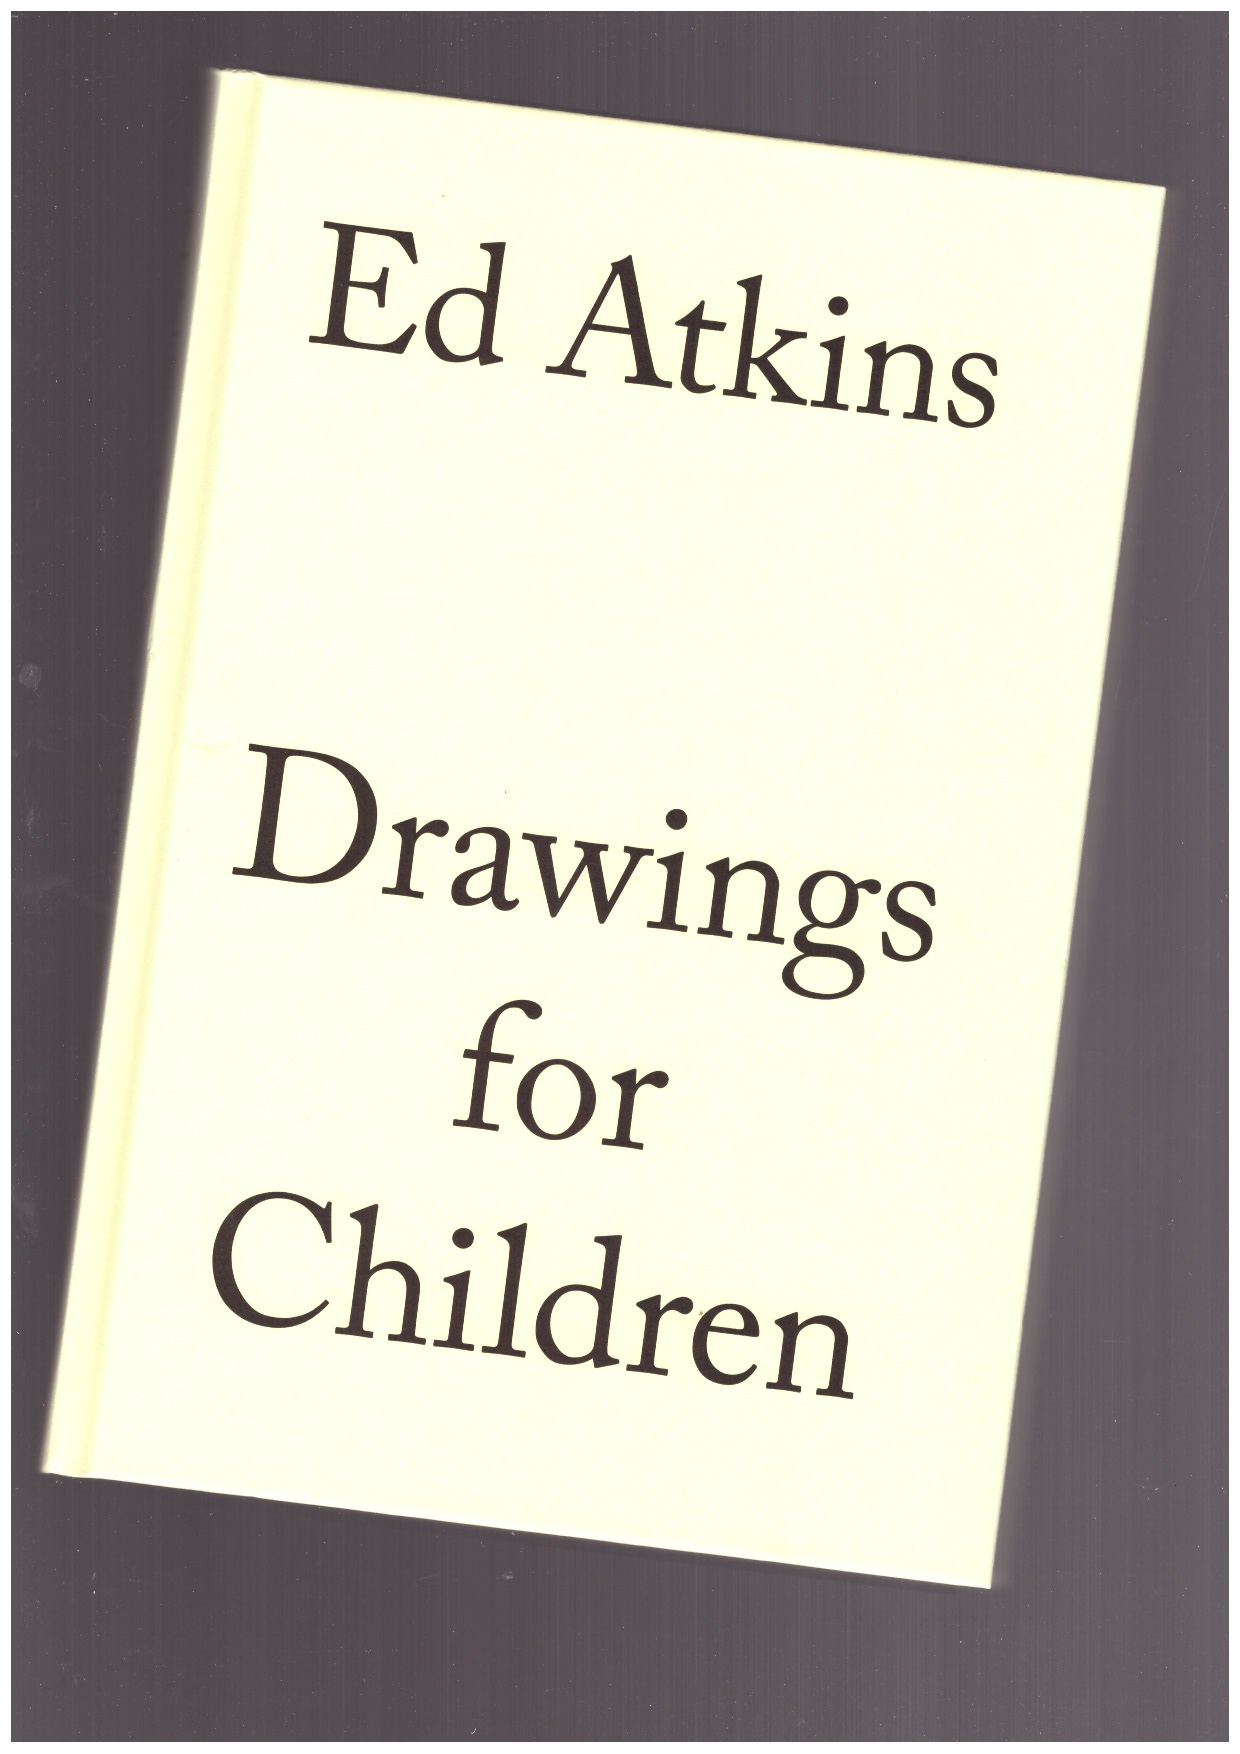 ATKINS, Ed - Drawings for Children